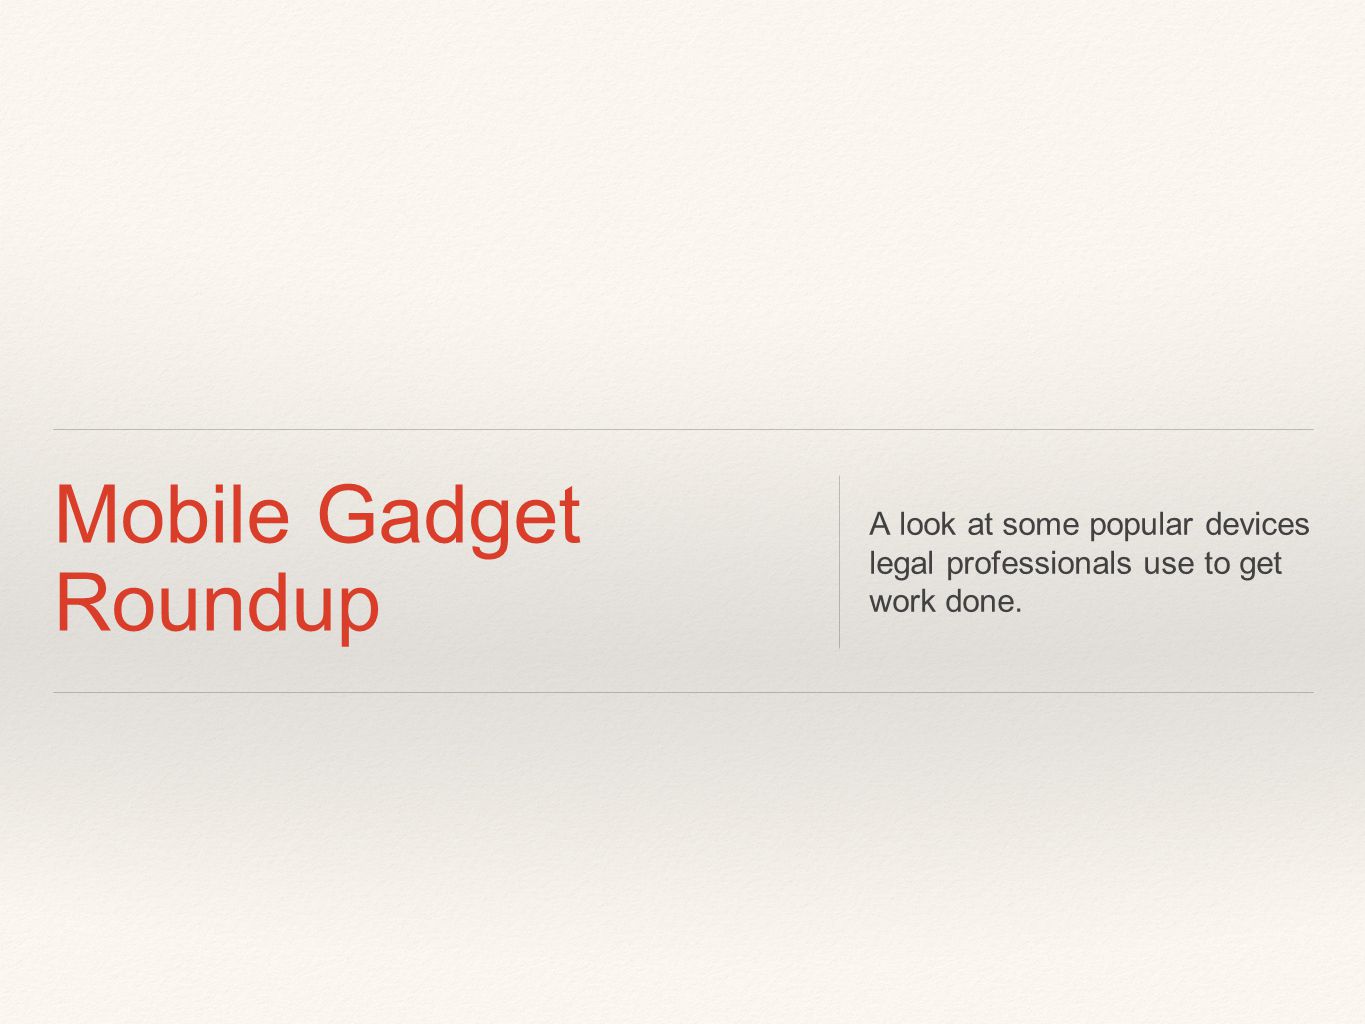 Mobile Gadget Roundup A look at some popular devices legal professionals use to get work done.